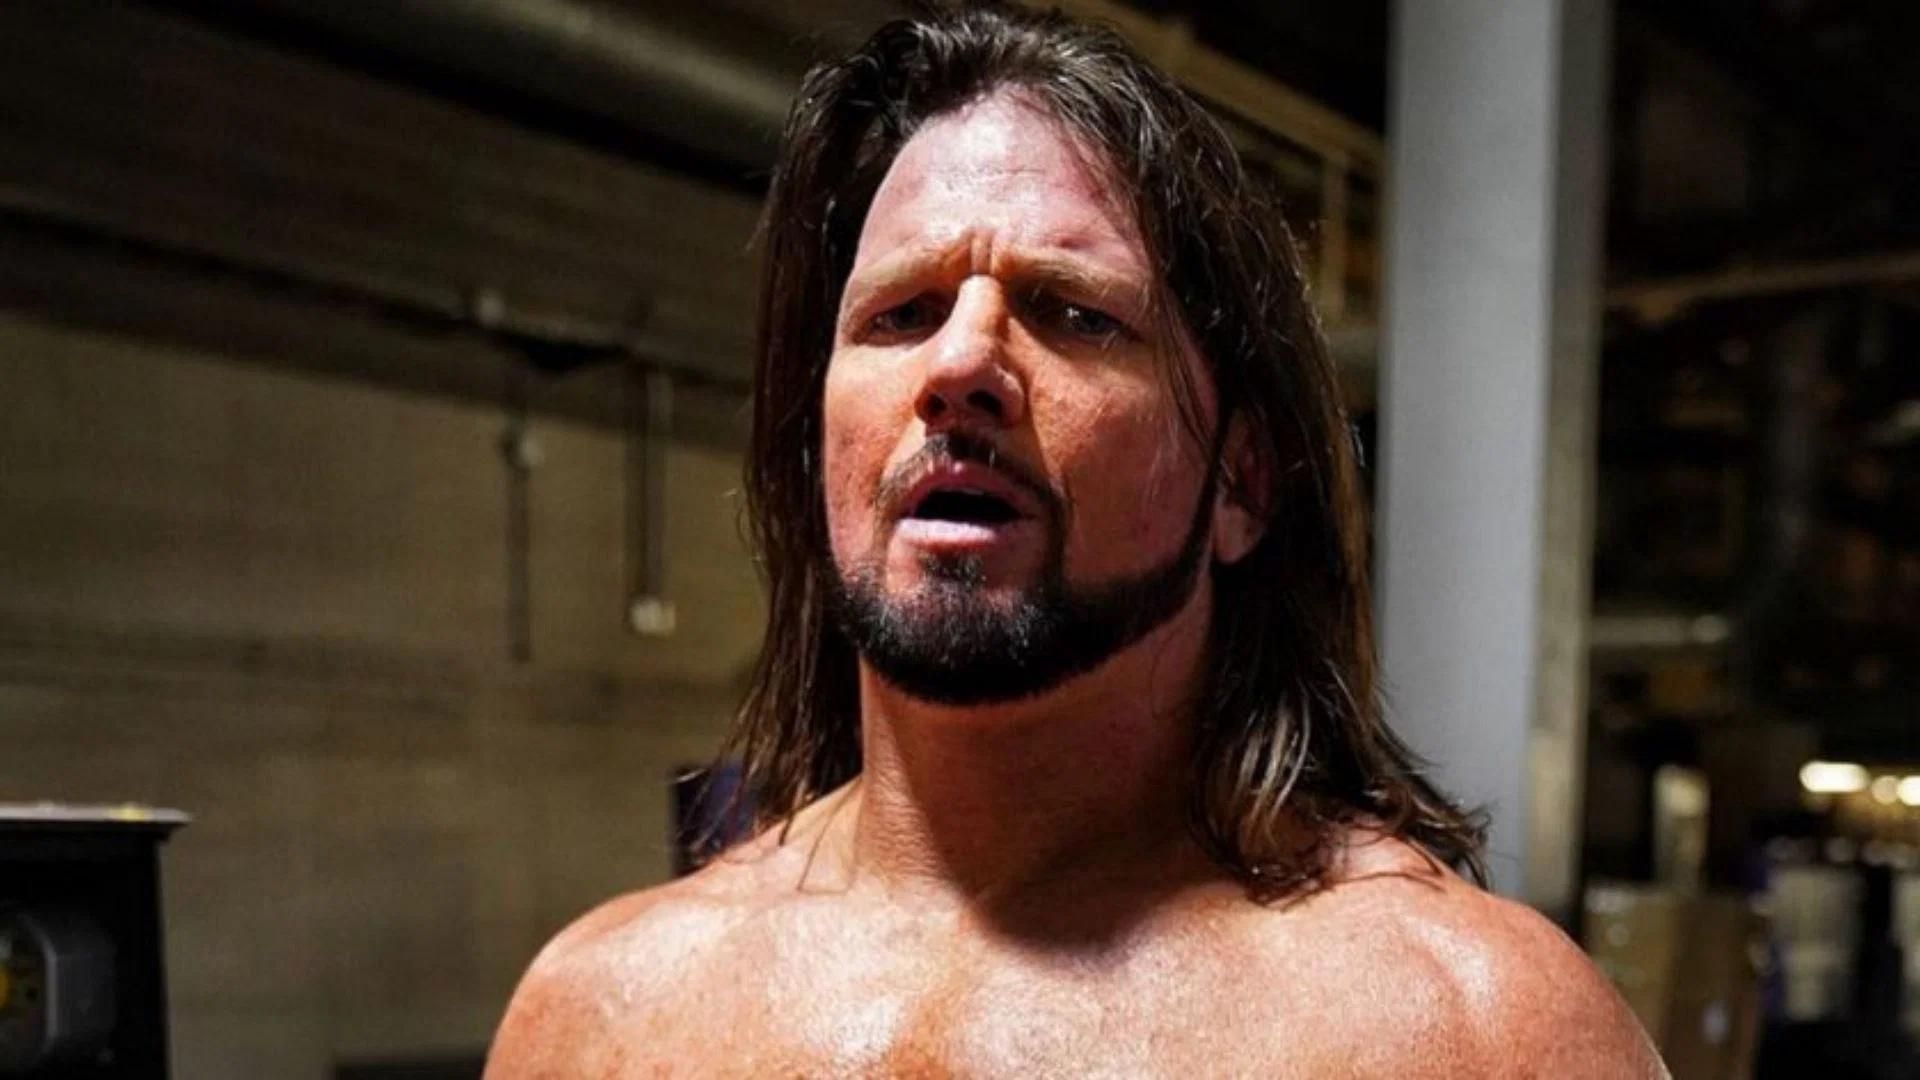 AJ Styles mentioned the former WWE Superstar on RAW